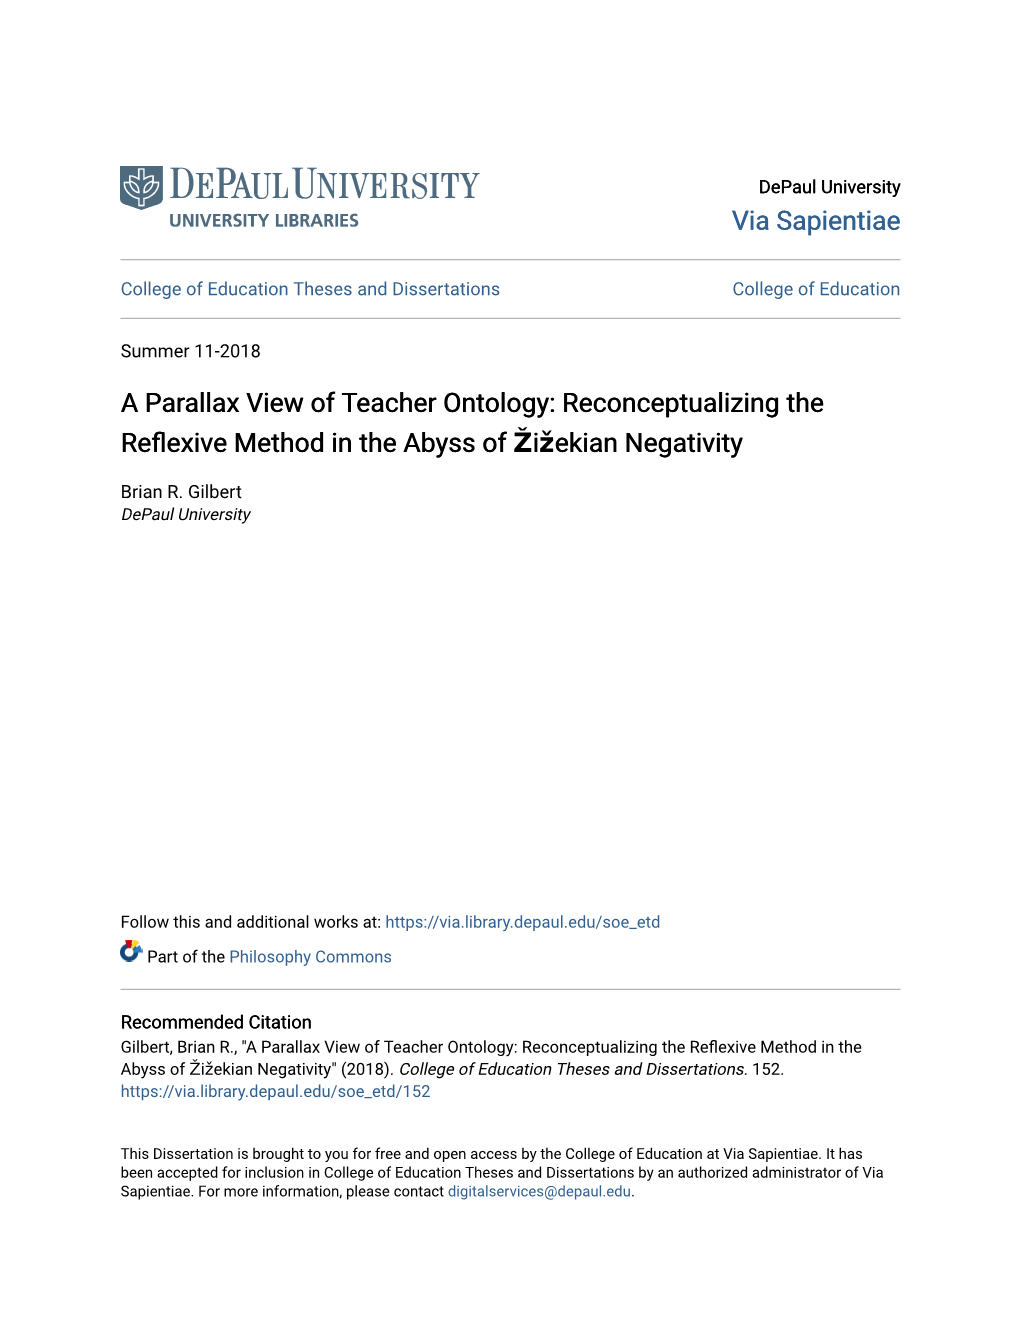 A Parallax View of Teacher Ontology: Reconceptualizing the Reflexive Method in the Abyss of Žižekian Negativity